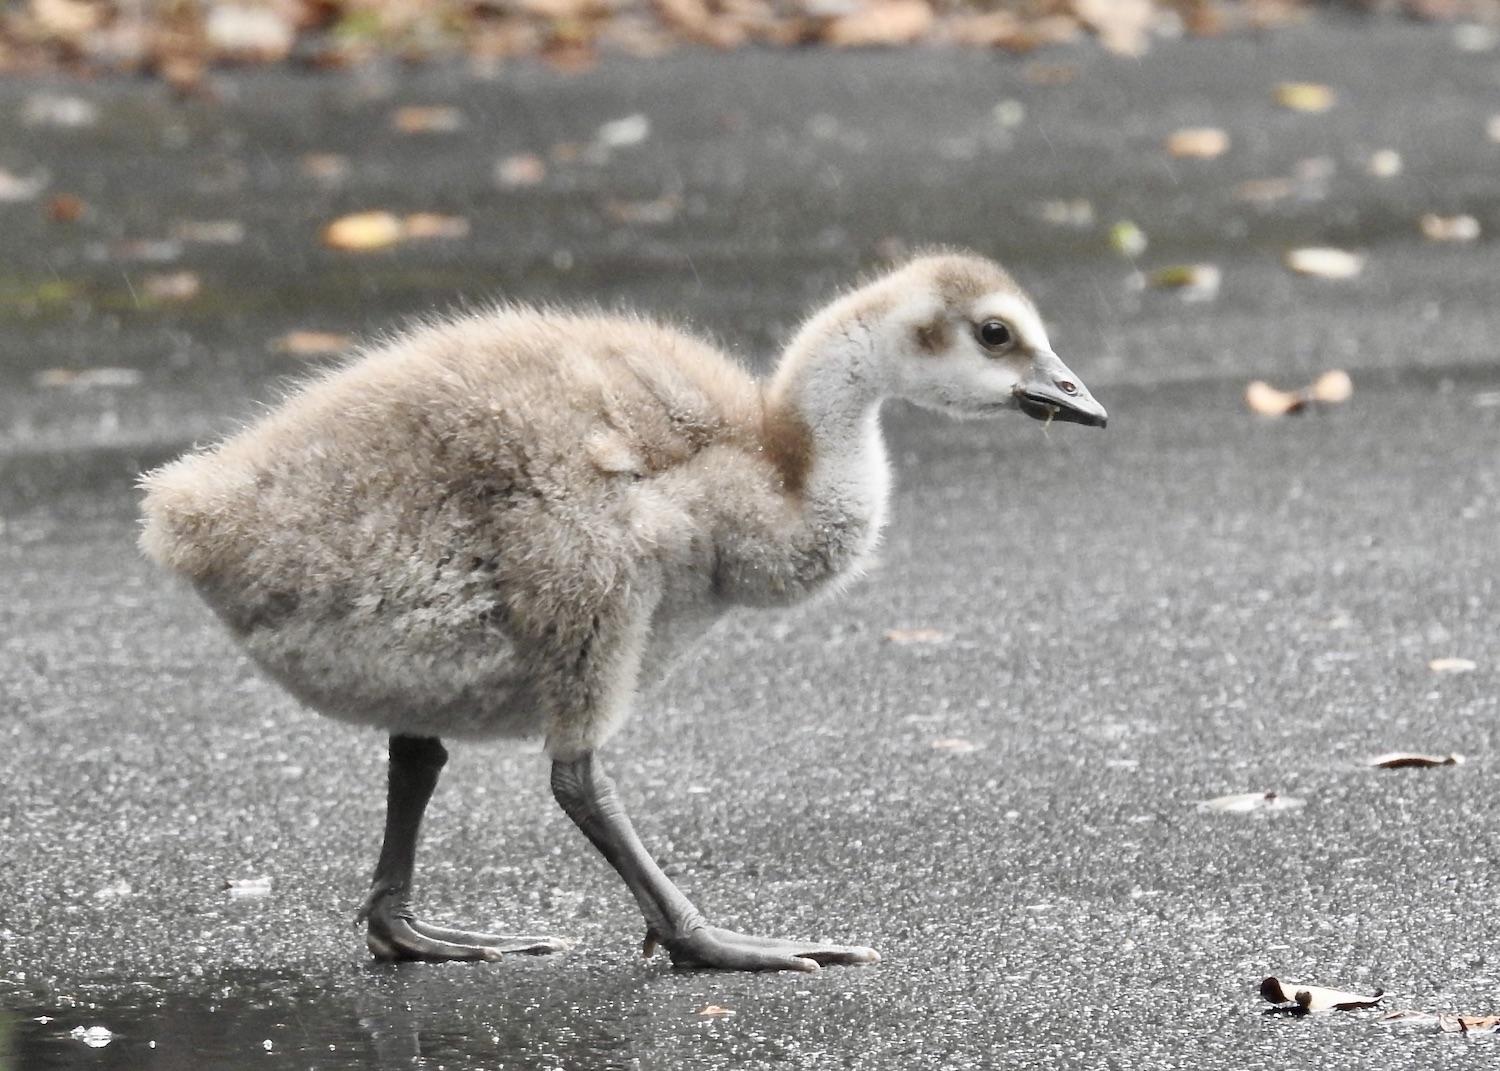 This nēnē gosling is already learning not to fear humans and to approach them for food.